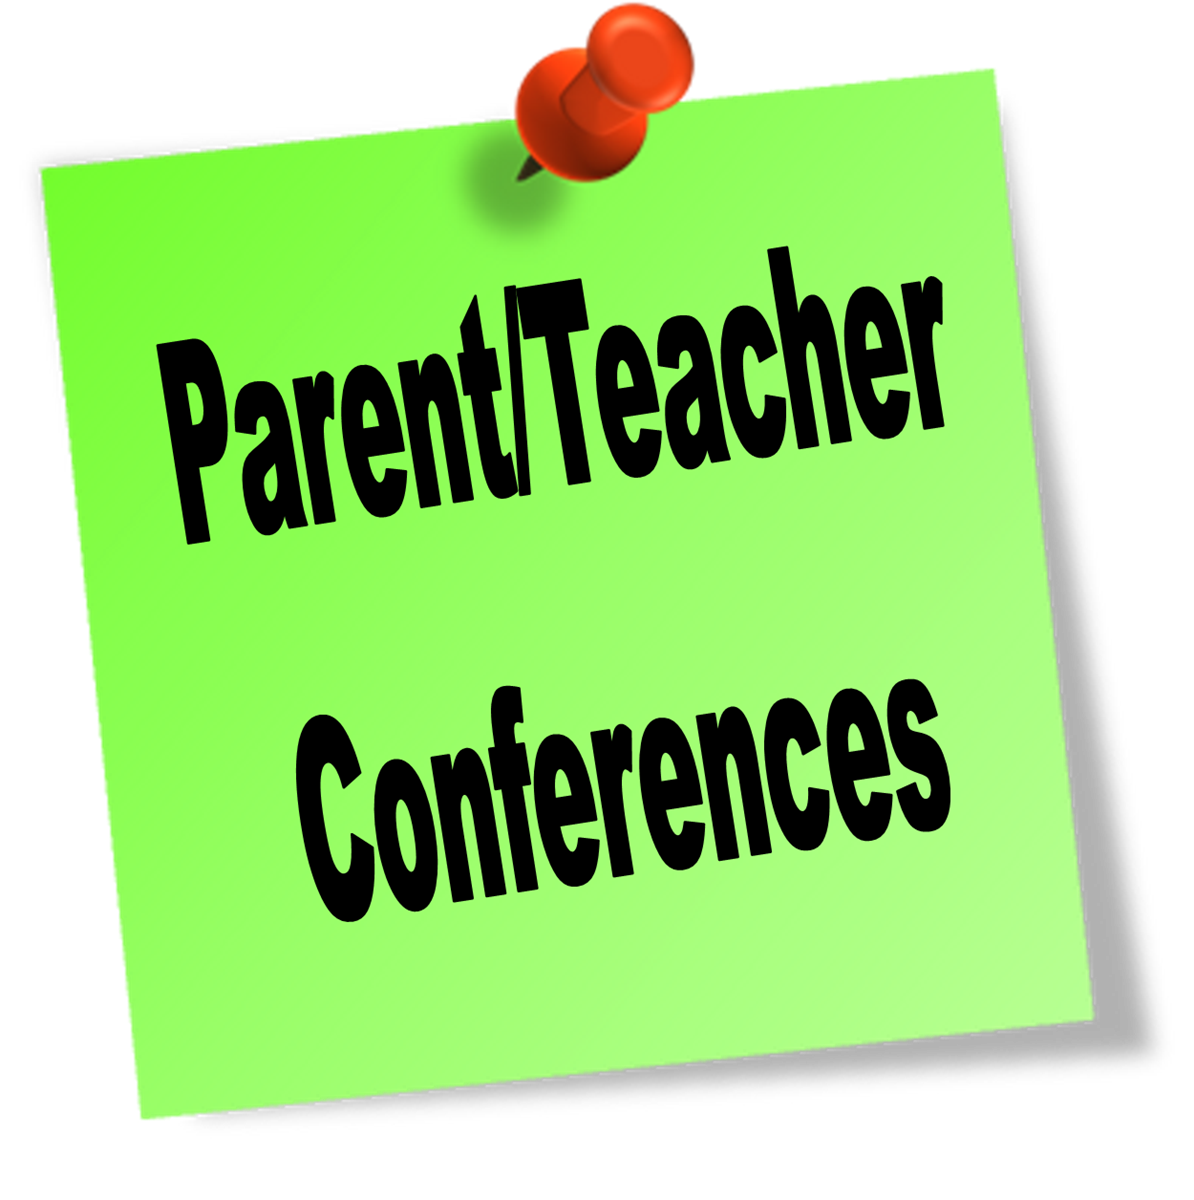 Matthews M.S. on Twitter: "Wednesday: Early Dismissal at 20:20 pm Inside Parent Teacher Conference Flyer Template